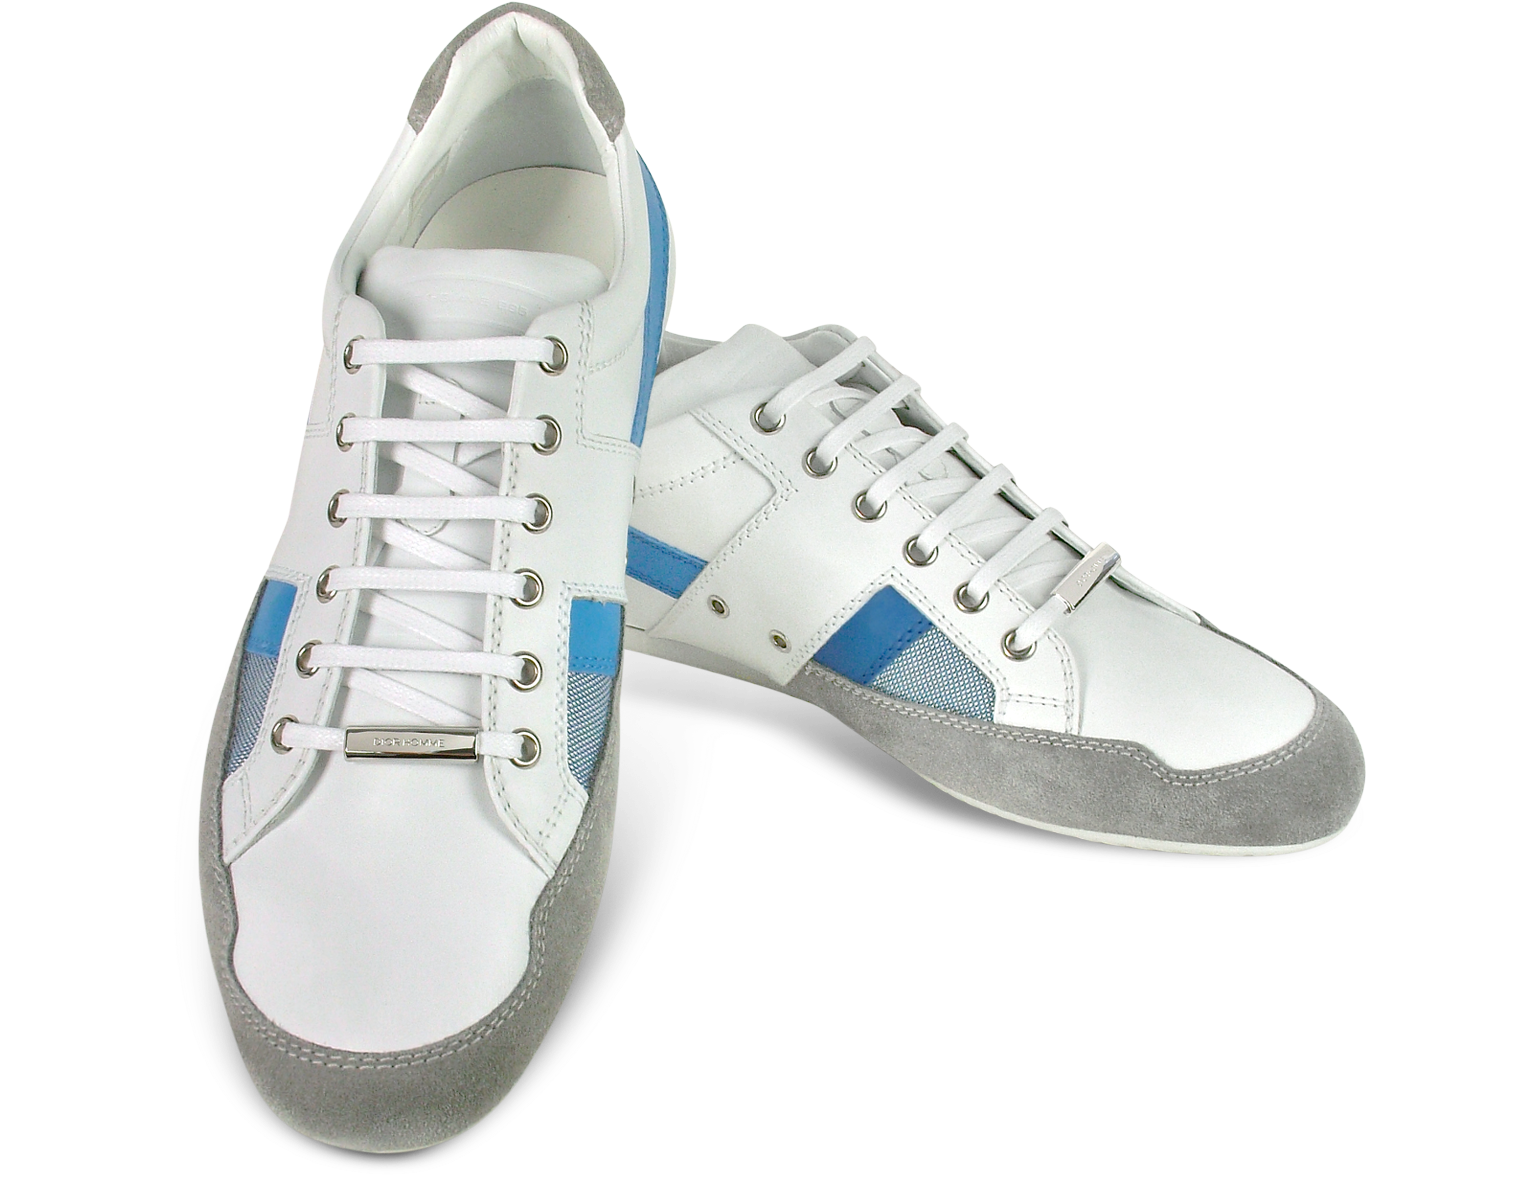 Christian Dior Dior Homme White & Blue Leather and Suede Sneaker Shoes ...